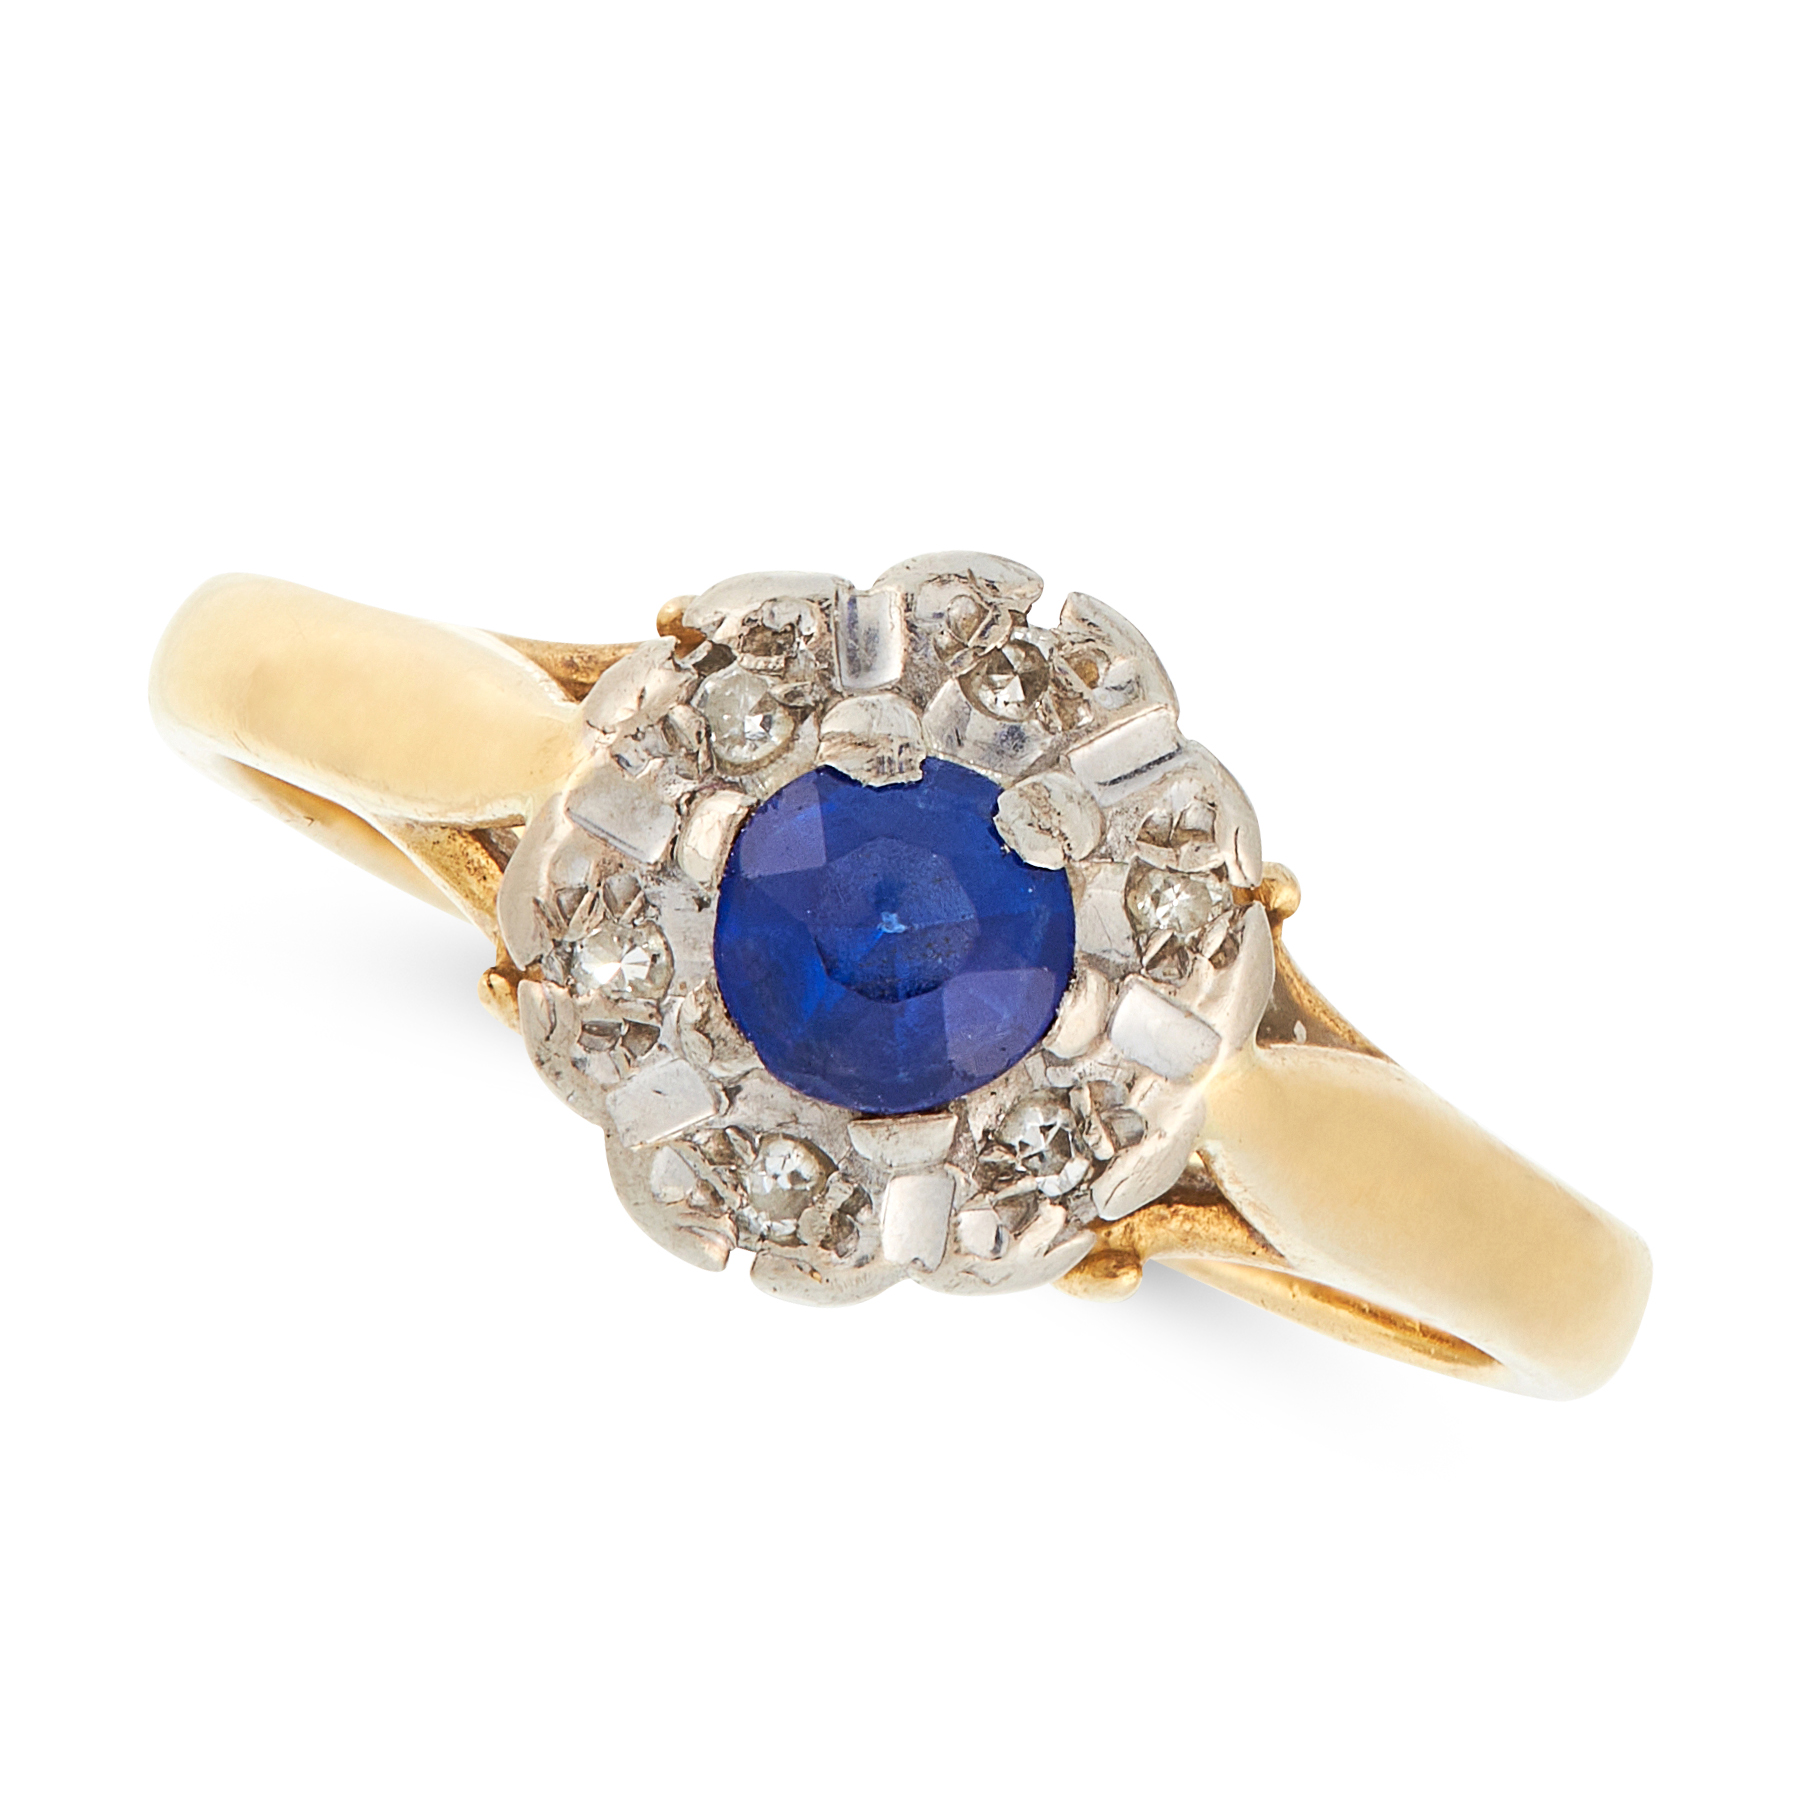 A SAPPHIRE AND DIAMOND CLUSTER RING in 18ct yellow gold, set with a round cut sapphire in a border